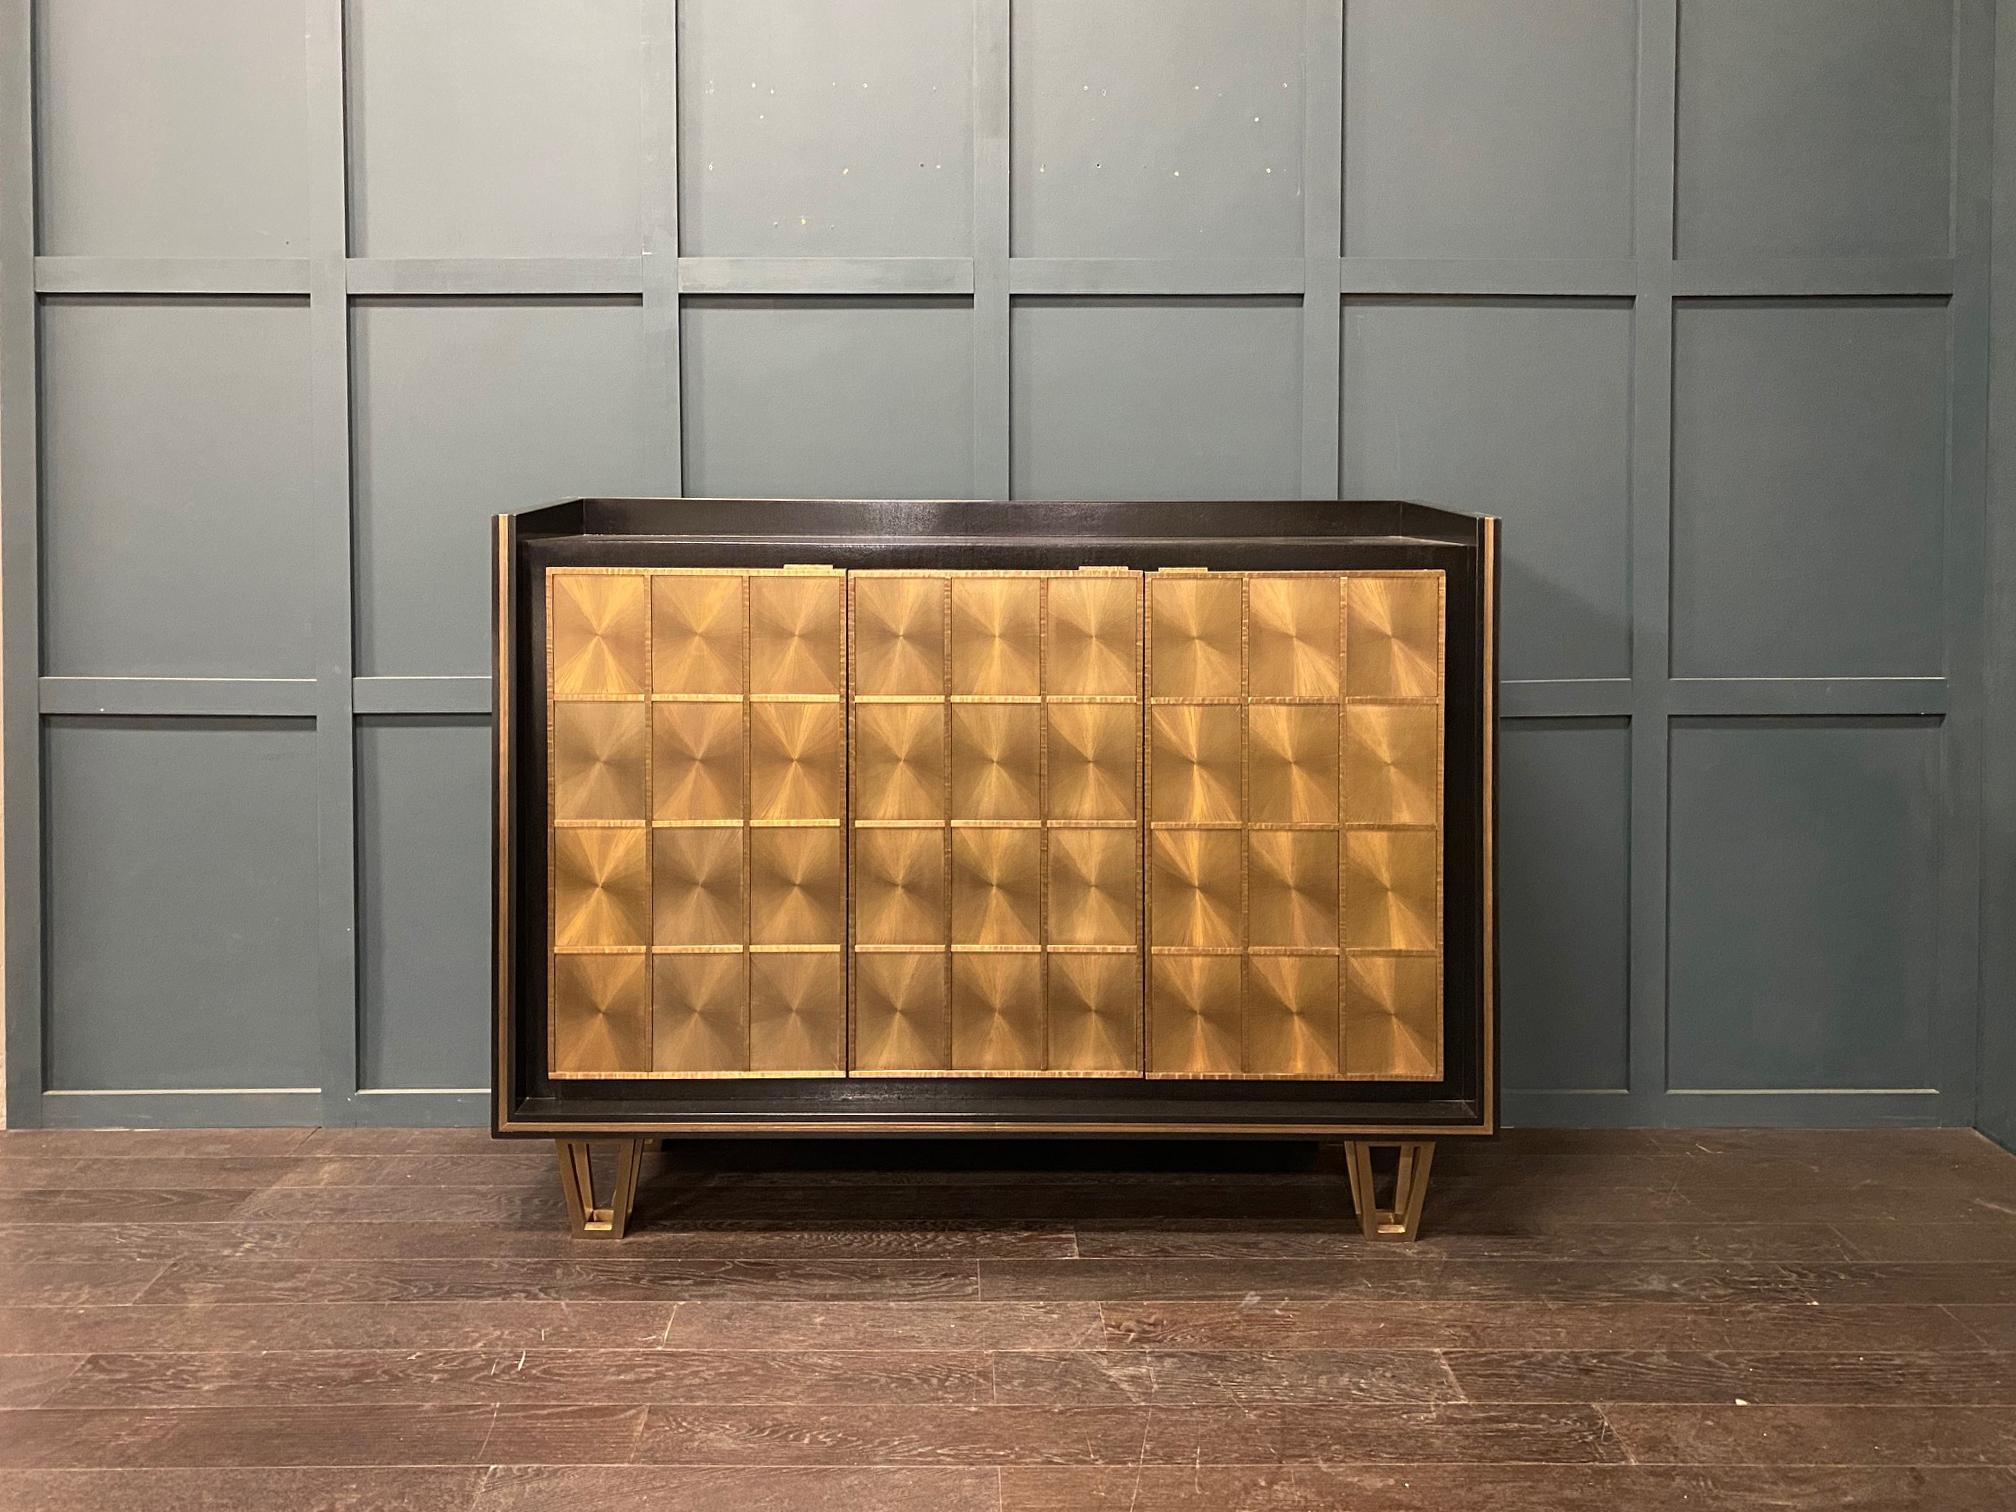 Todd Merrill Studio began representing Welsh artist Damian Jones in 2018. Jones creates hand-made, metal clad furniture out of his Los Angeles studio. Creating a constantly evolving visual language that is both unprecedented and familiar, his